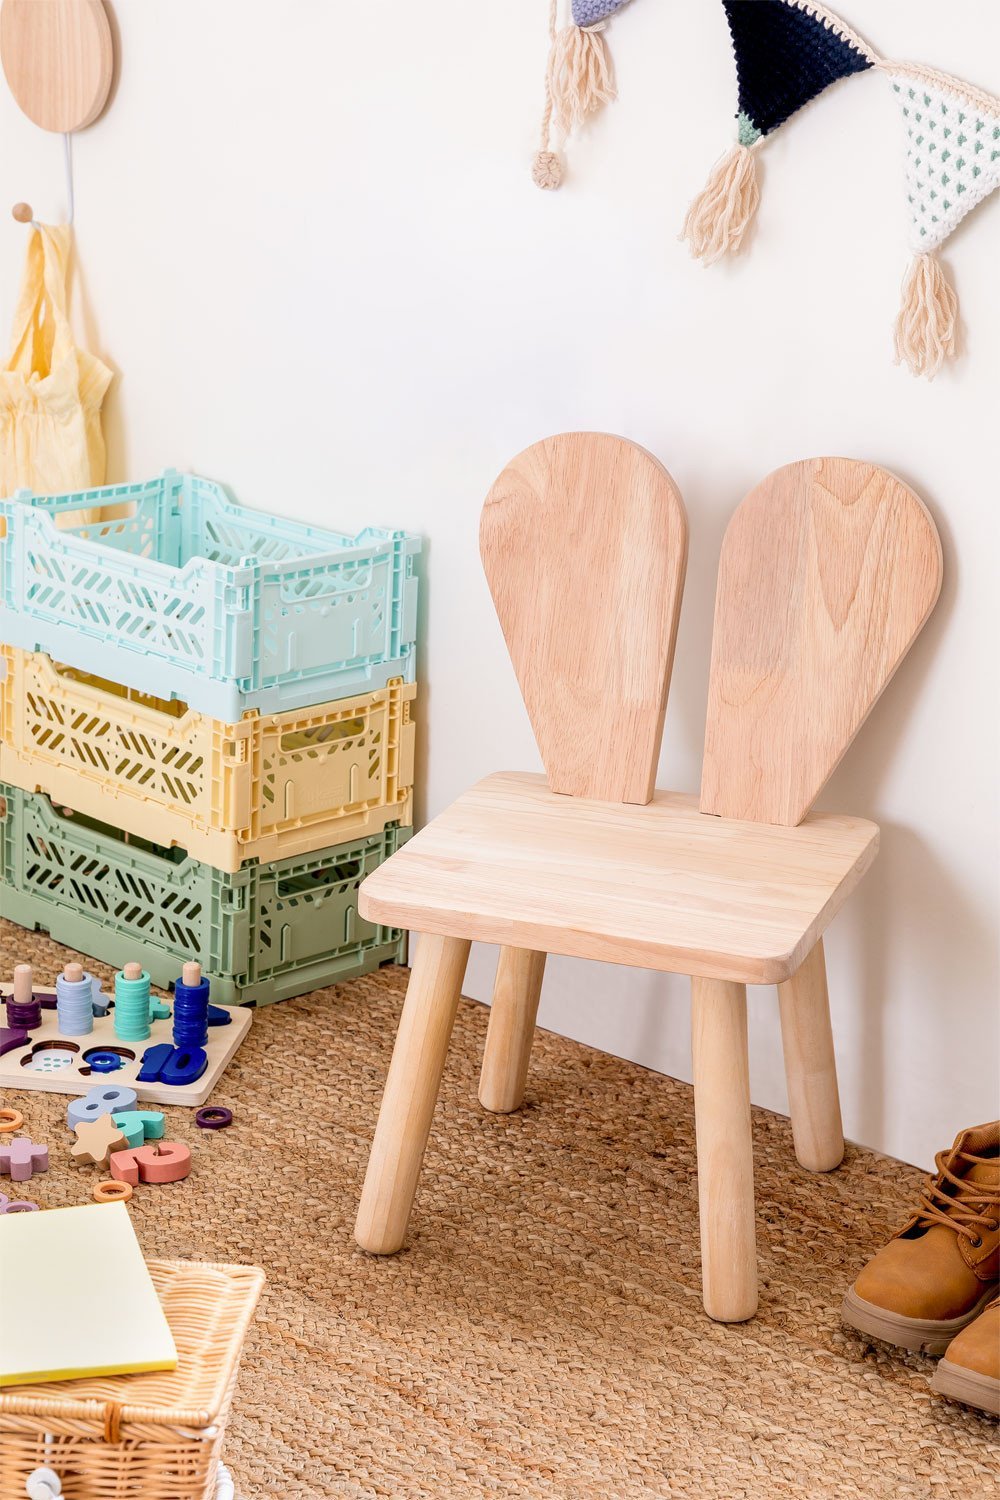  Wooden Chair Buny Style Kids, gallery image 1